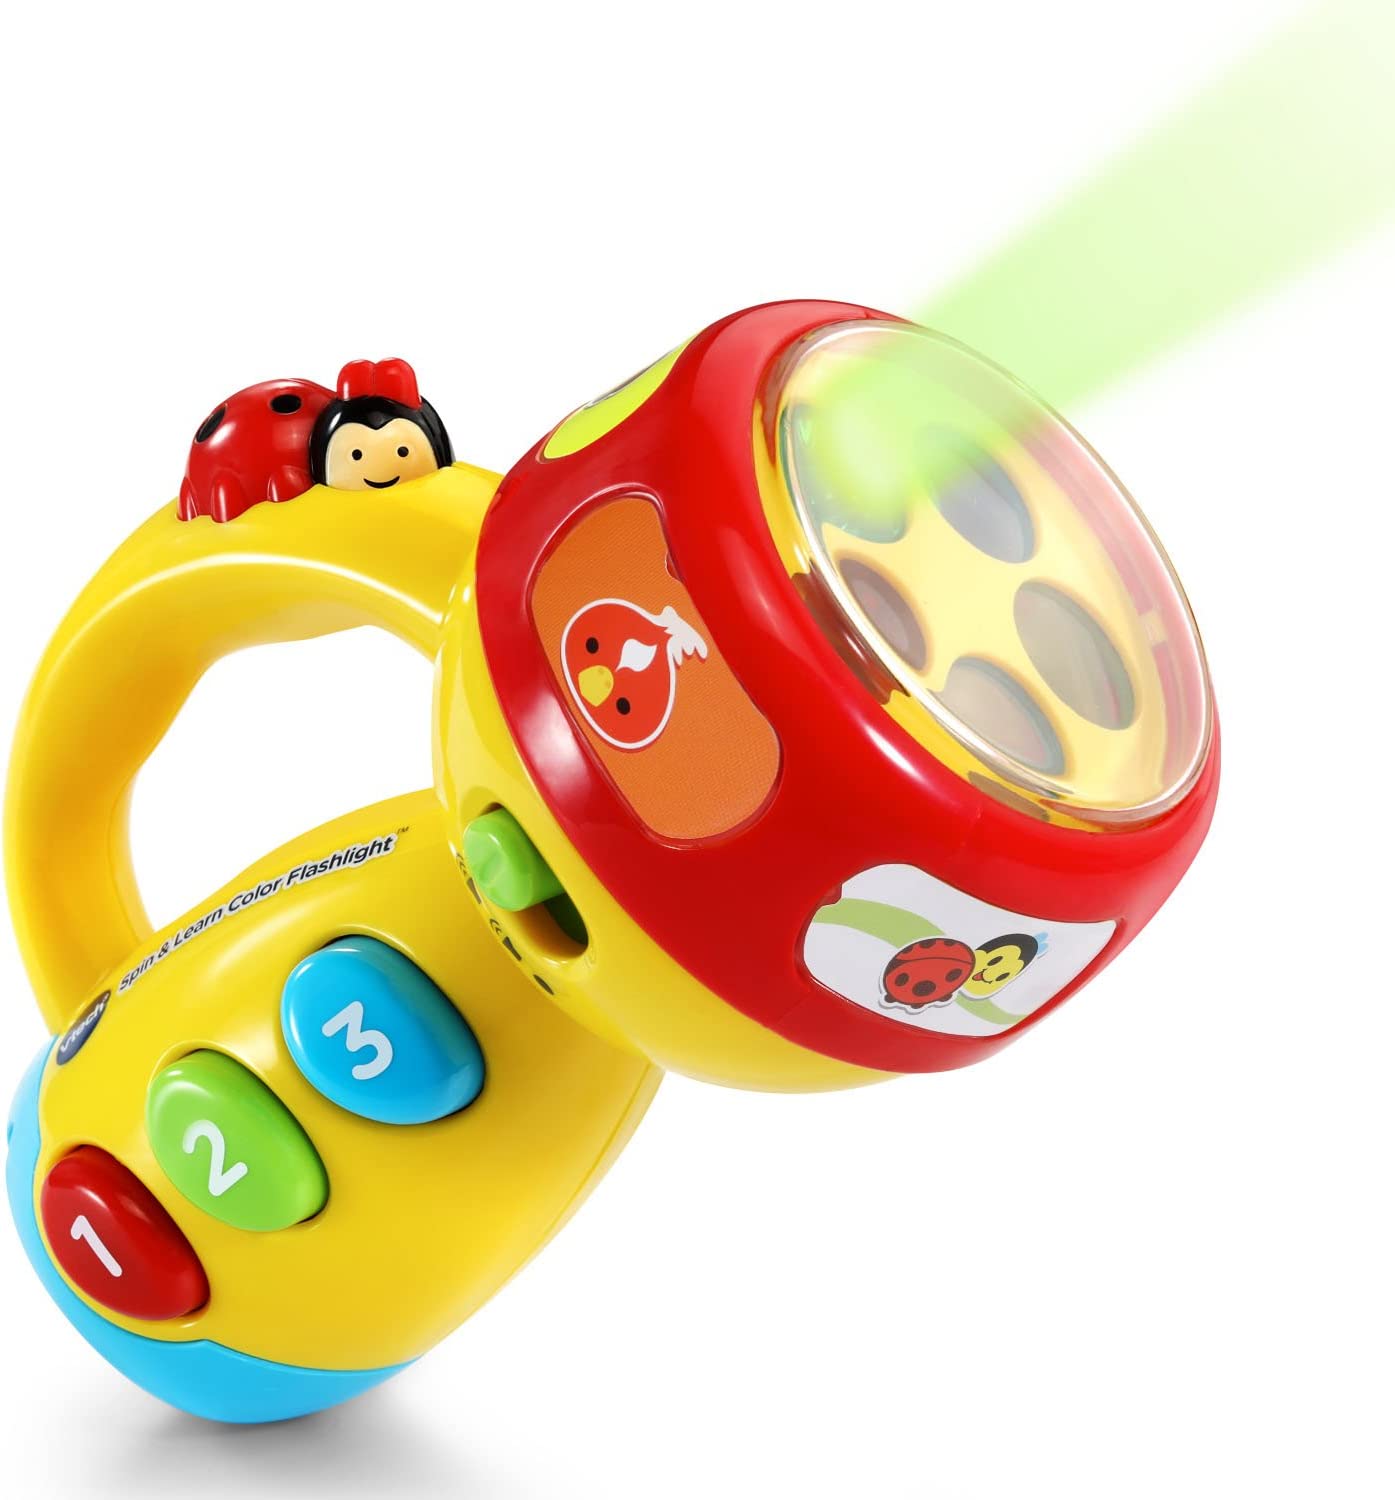 VTech Spin and Learn Color Flashlight, Yellow - for Infants and Toddlers Ages 1 to 3 Years